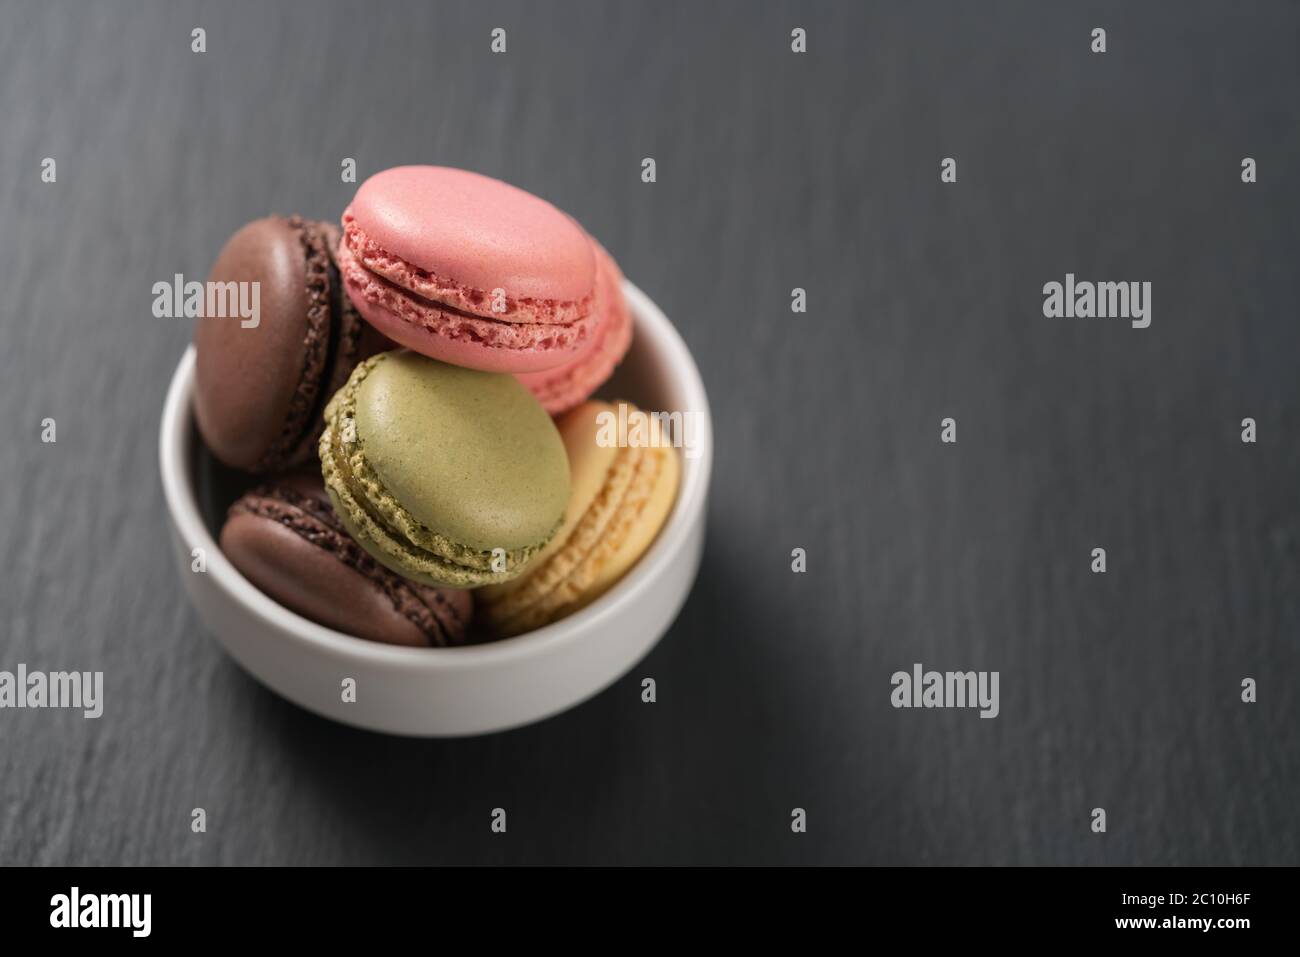 assorted macarons in white bowl on slate background with copy space Stock Photo